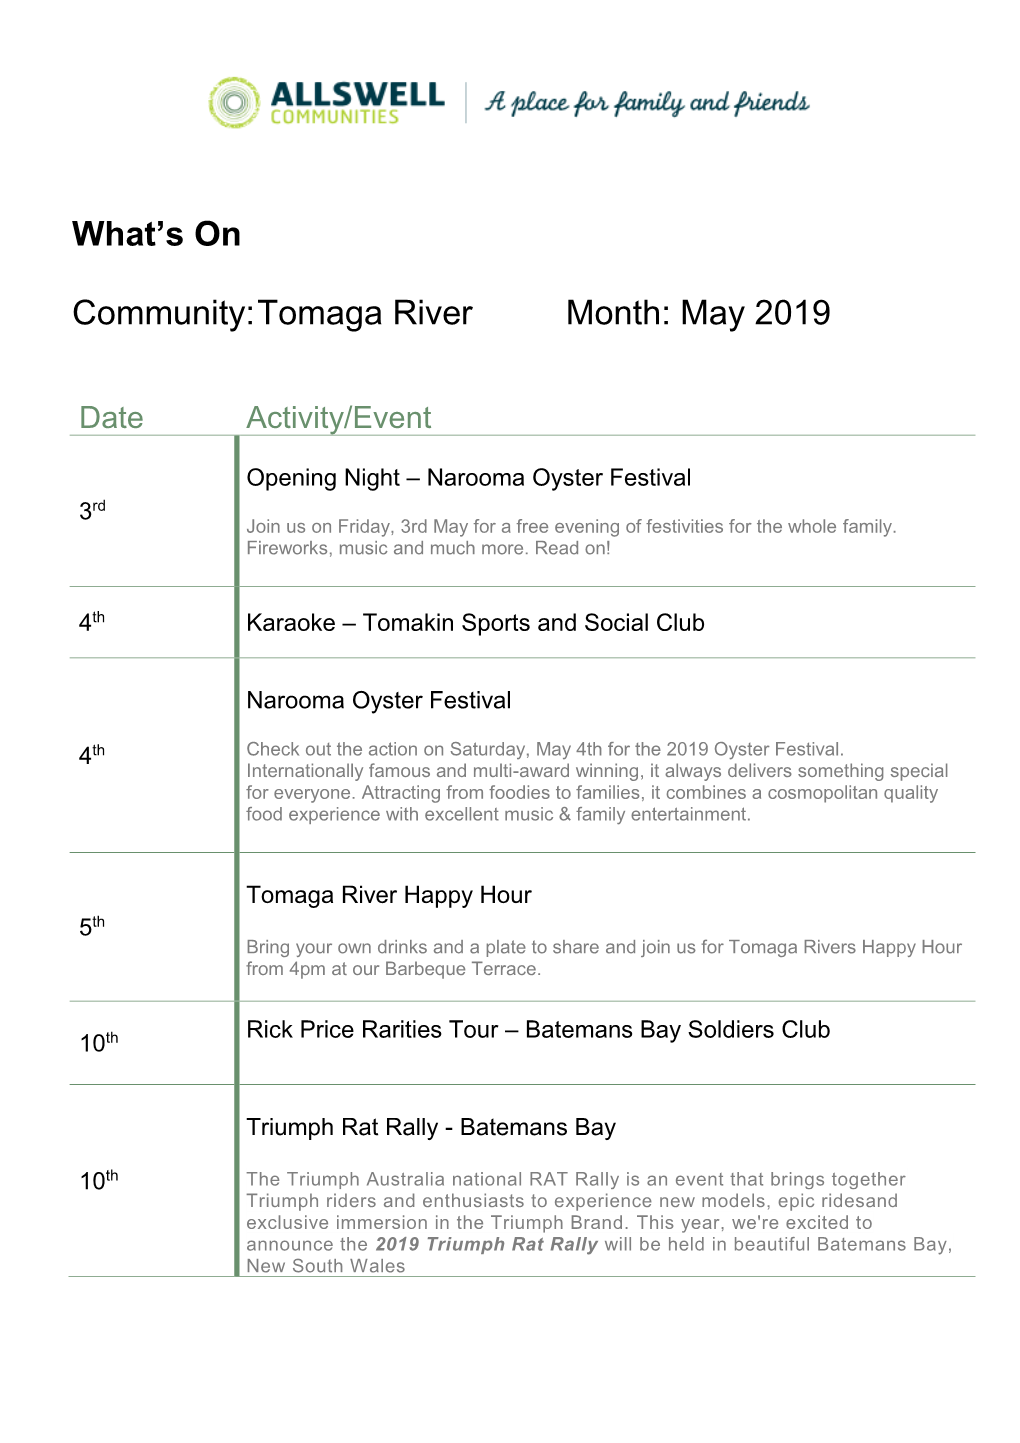 What's on Community: Tomaga River Month: May 2019